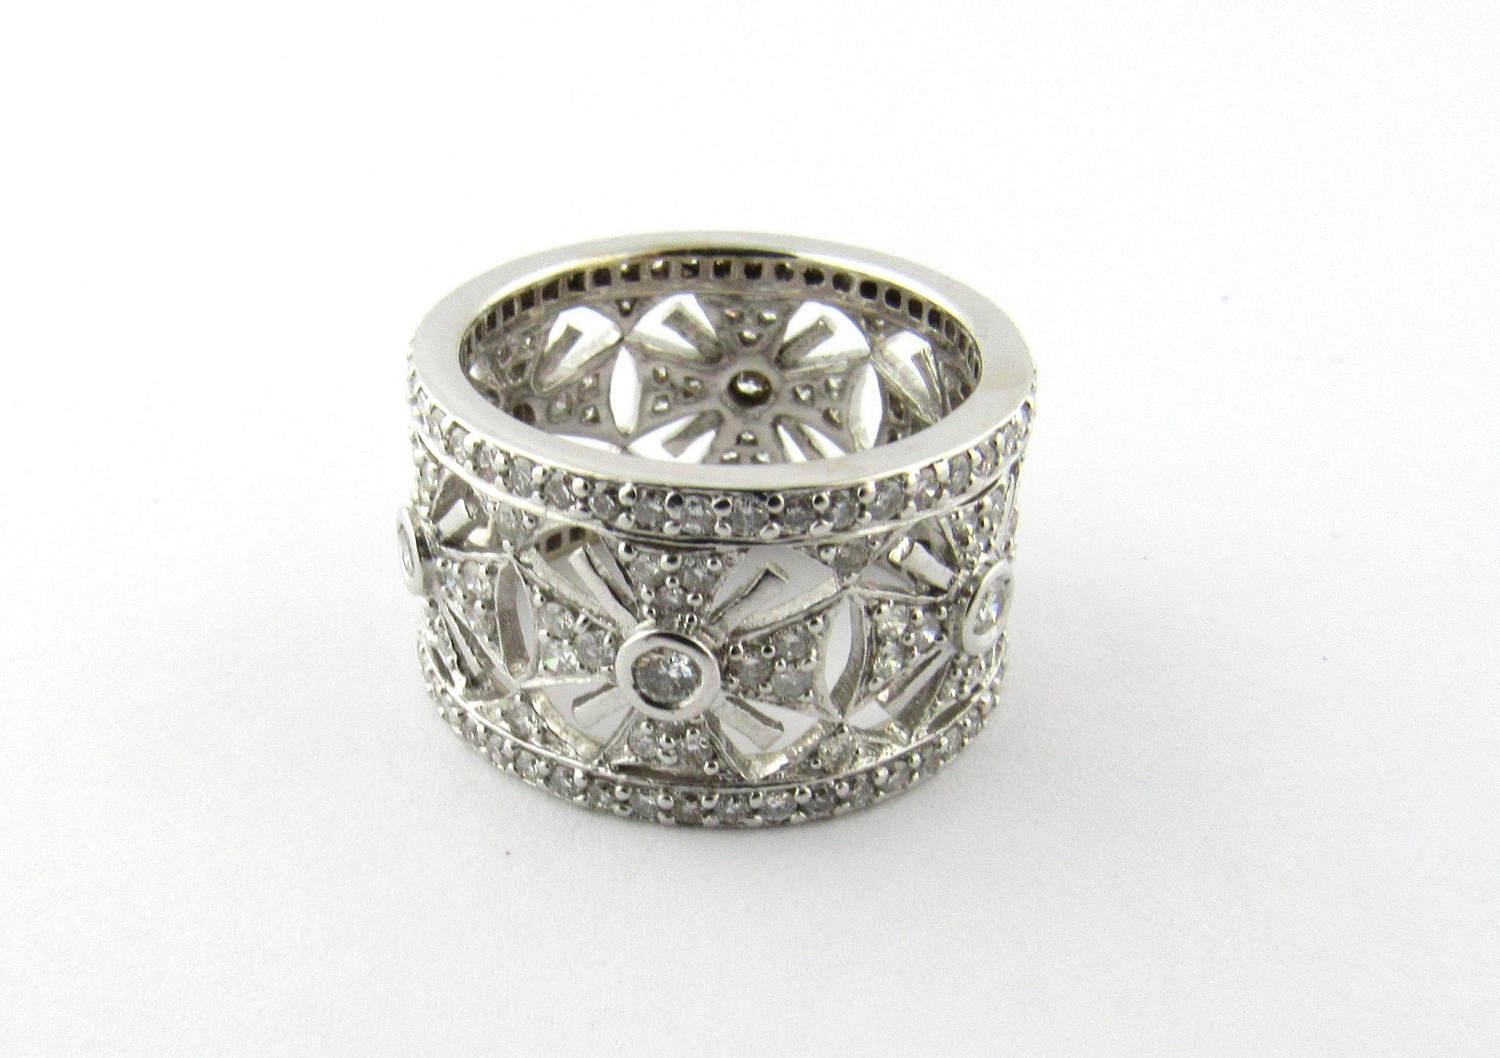 Vintage 18 Karat White Gold Diamond Band Size 6.5

This stunning band features 134 round brilliant cut diamonds set in beautifully detailed 18K white gold. 

Band width 12 mm. 

Approximate diamond weight: 1.70 cts. 

Diamond clarity: SI-I1